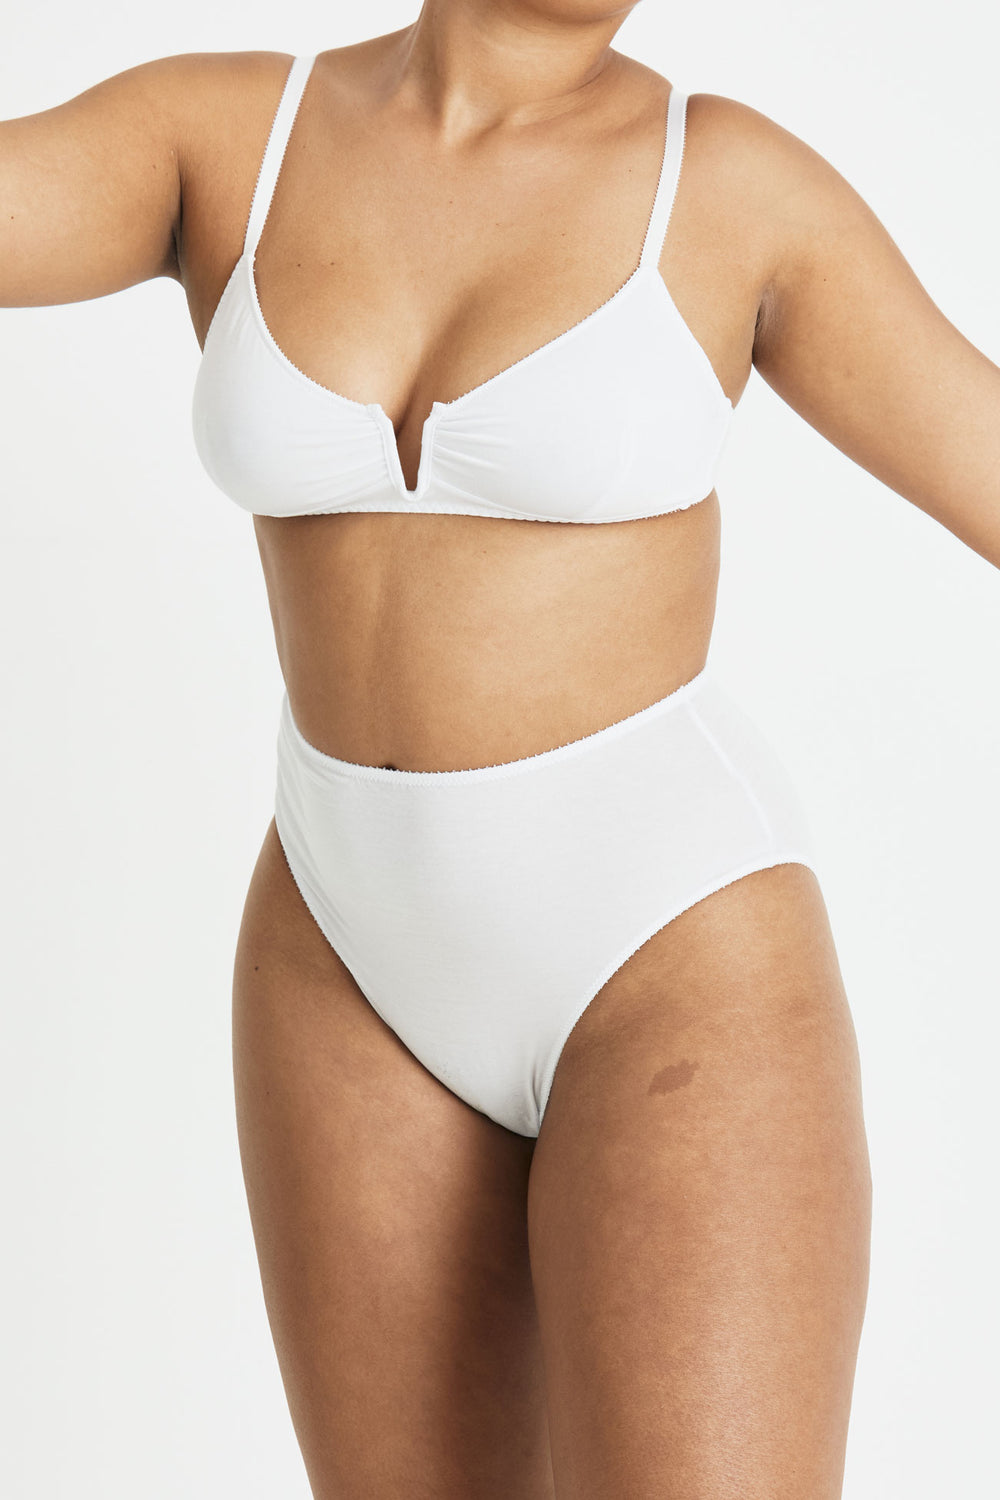 Videris Lingerie Angela underwire free soft cup bra in white TENCEL™ has a triangle shaped cup and front gathering detail